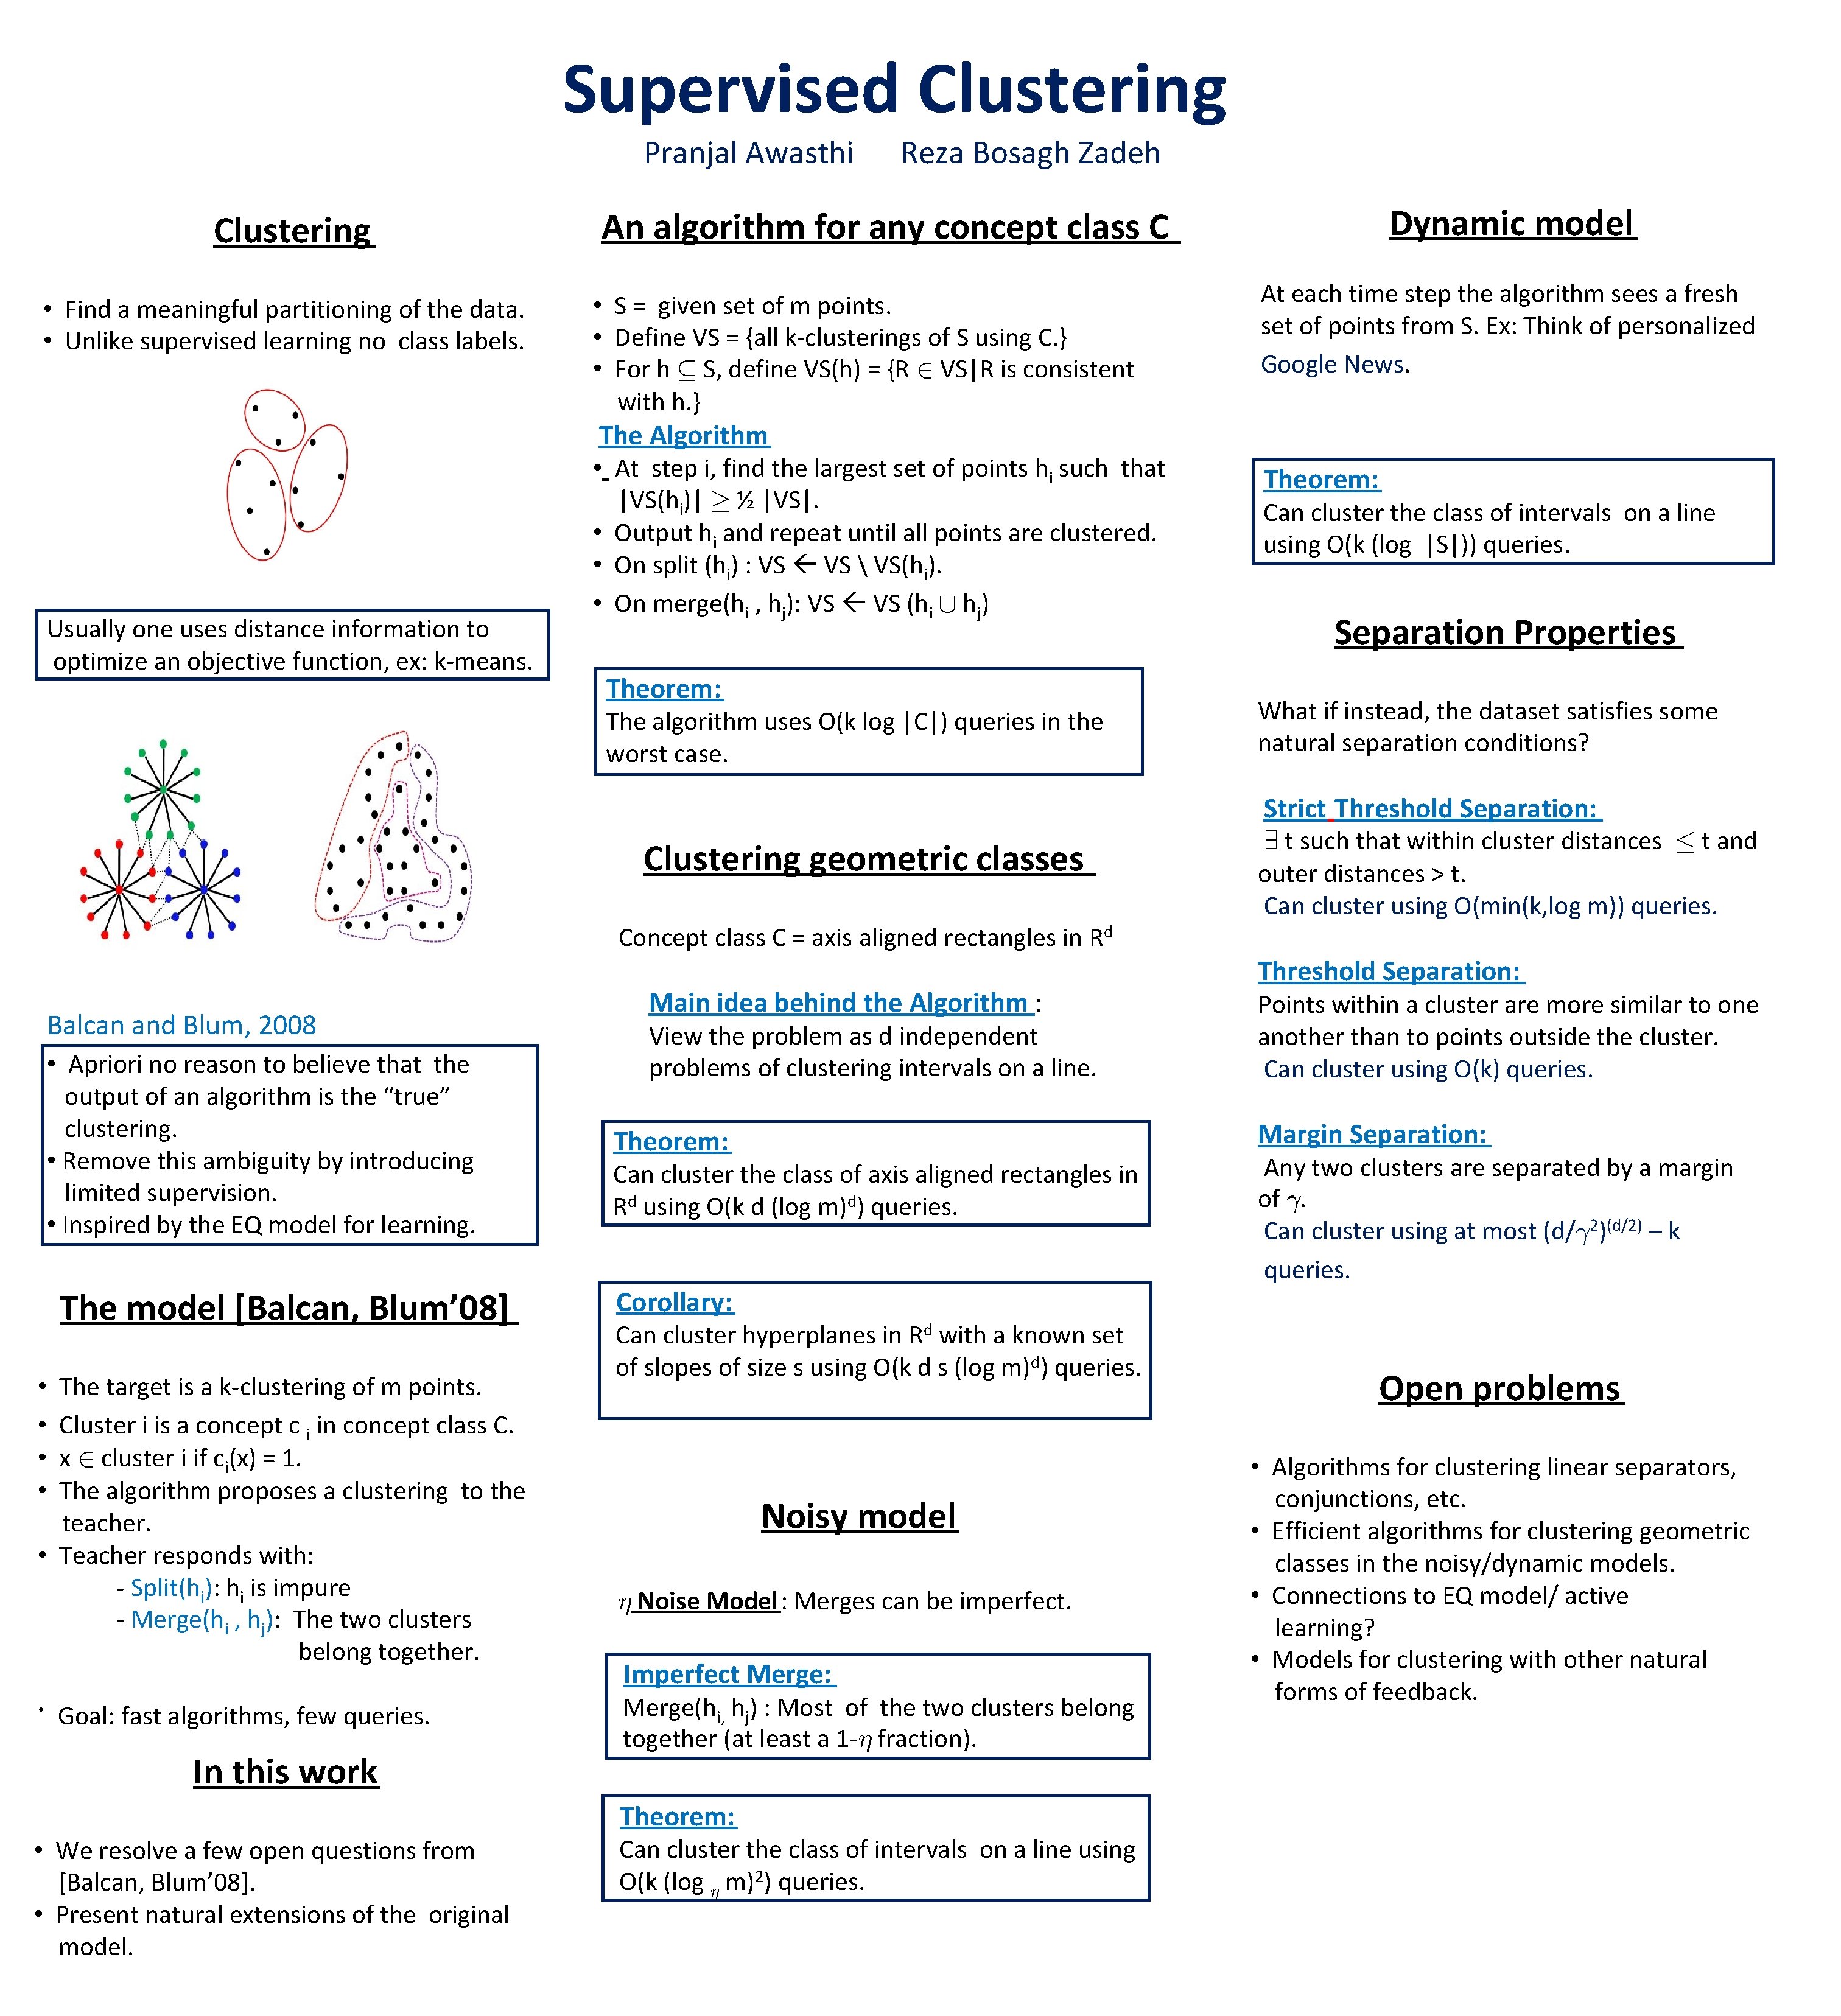 Supervised Clustering Pranjal Awasthi Clustering • Find a meaningful partitioning of the data. •